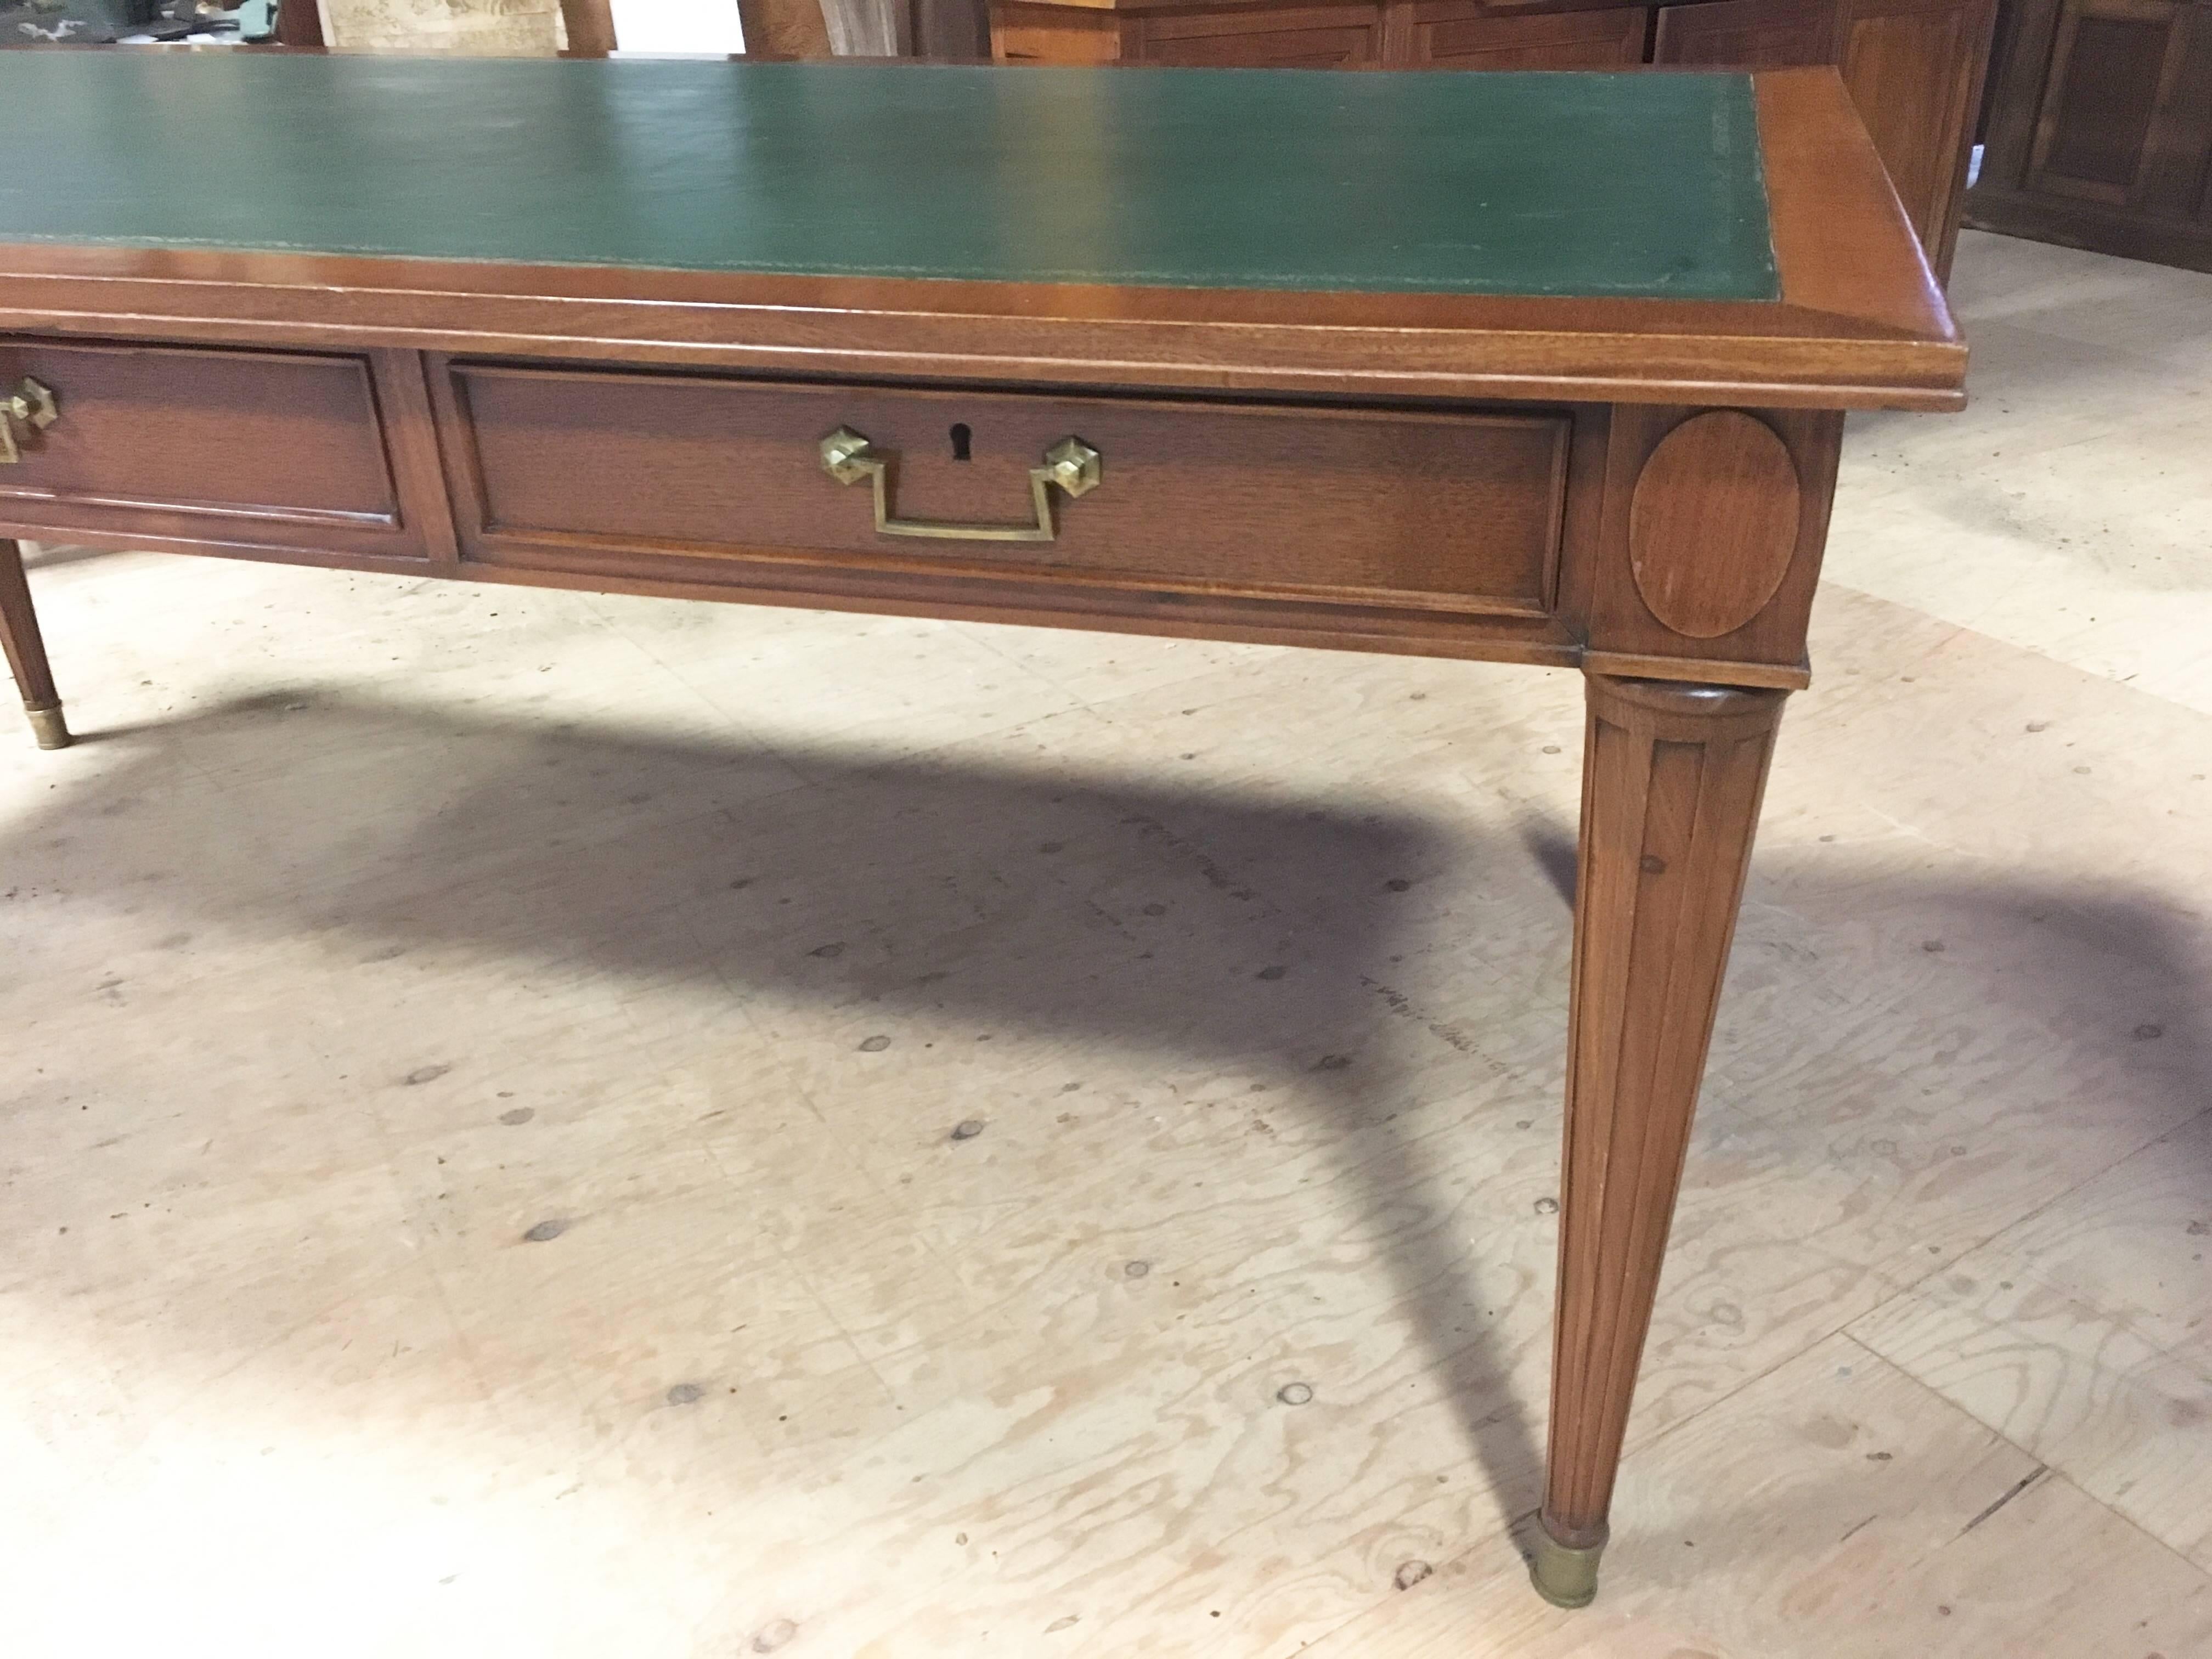 A Classic Louis XVI style bureau plat (writing table) in light mahogany with inset green leather writing surface and three large drawers in the apron. Signed with a metal label in one drawer 